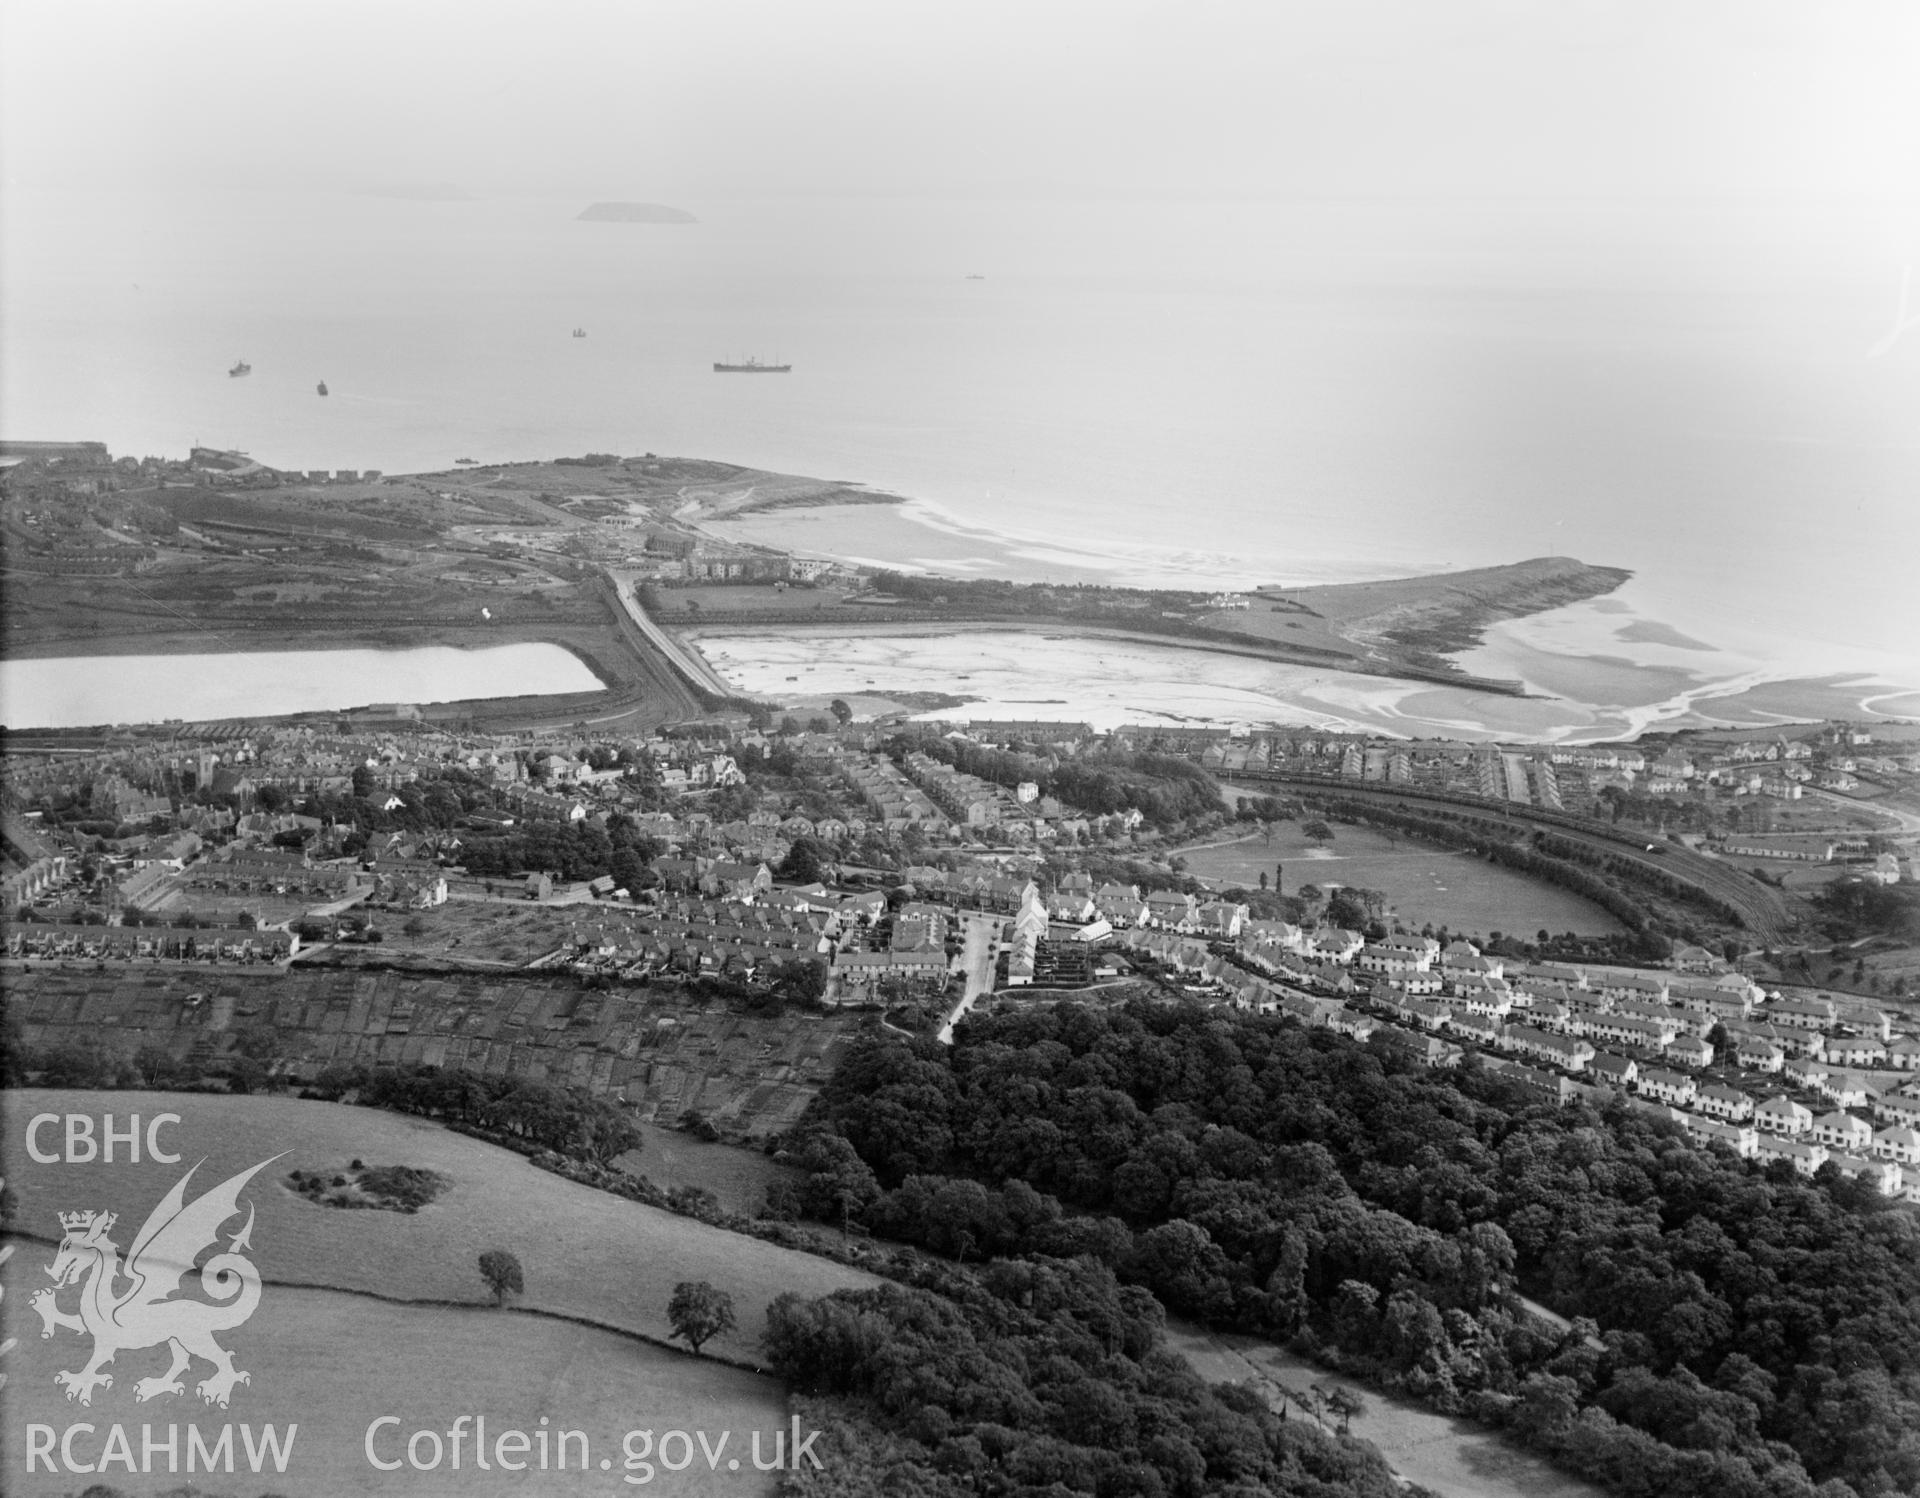 General view of Barry showing Romily Park and Barry Island, oblique aerial view. 5?x4? black and white glass plate negative.